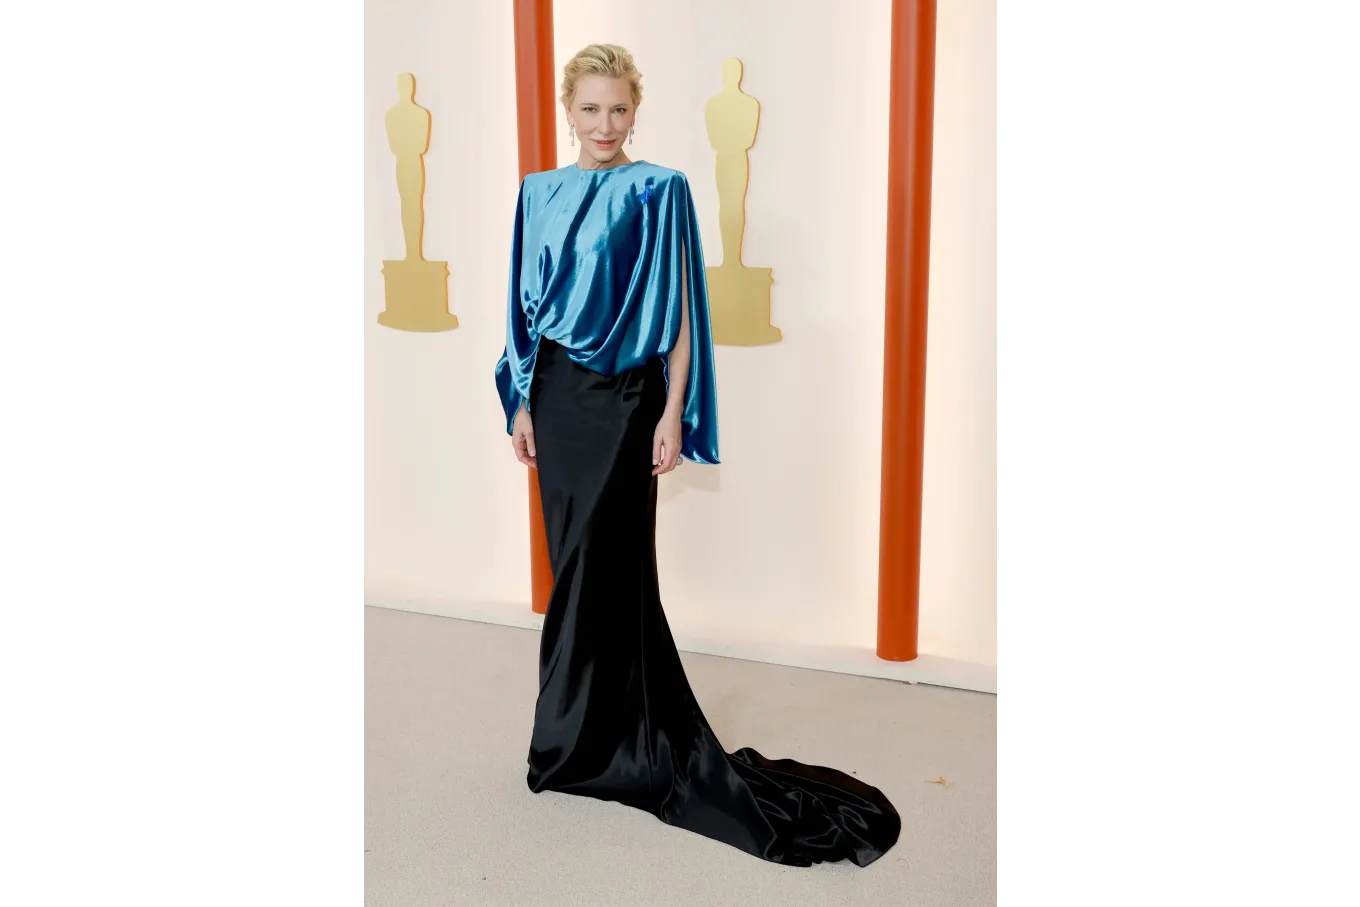 Cate Blanchett in a blue top with a long black skirt